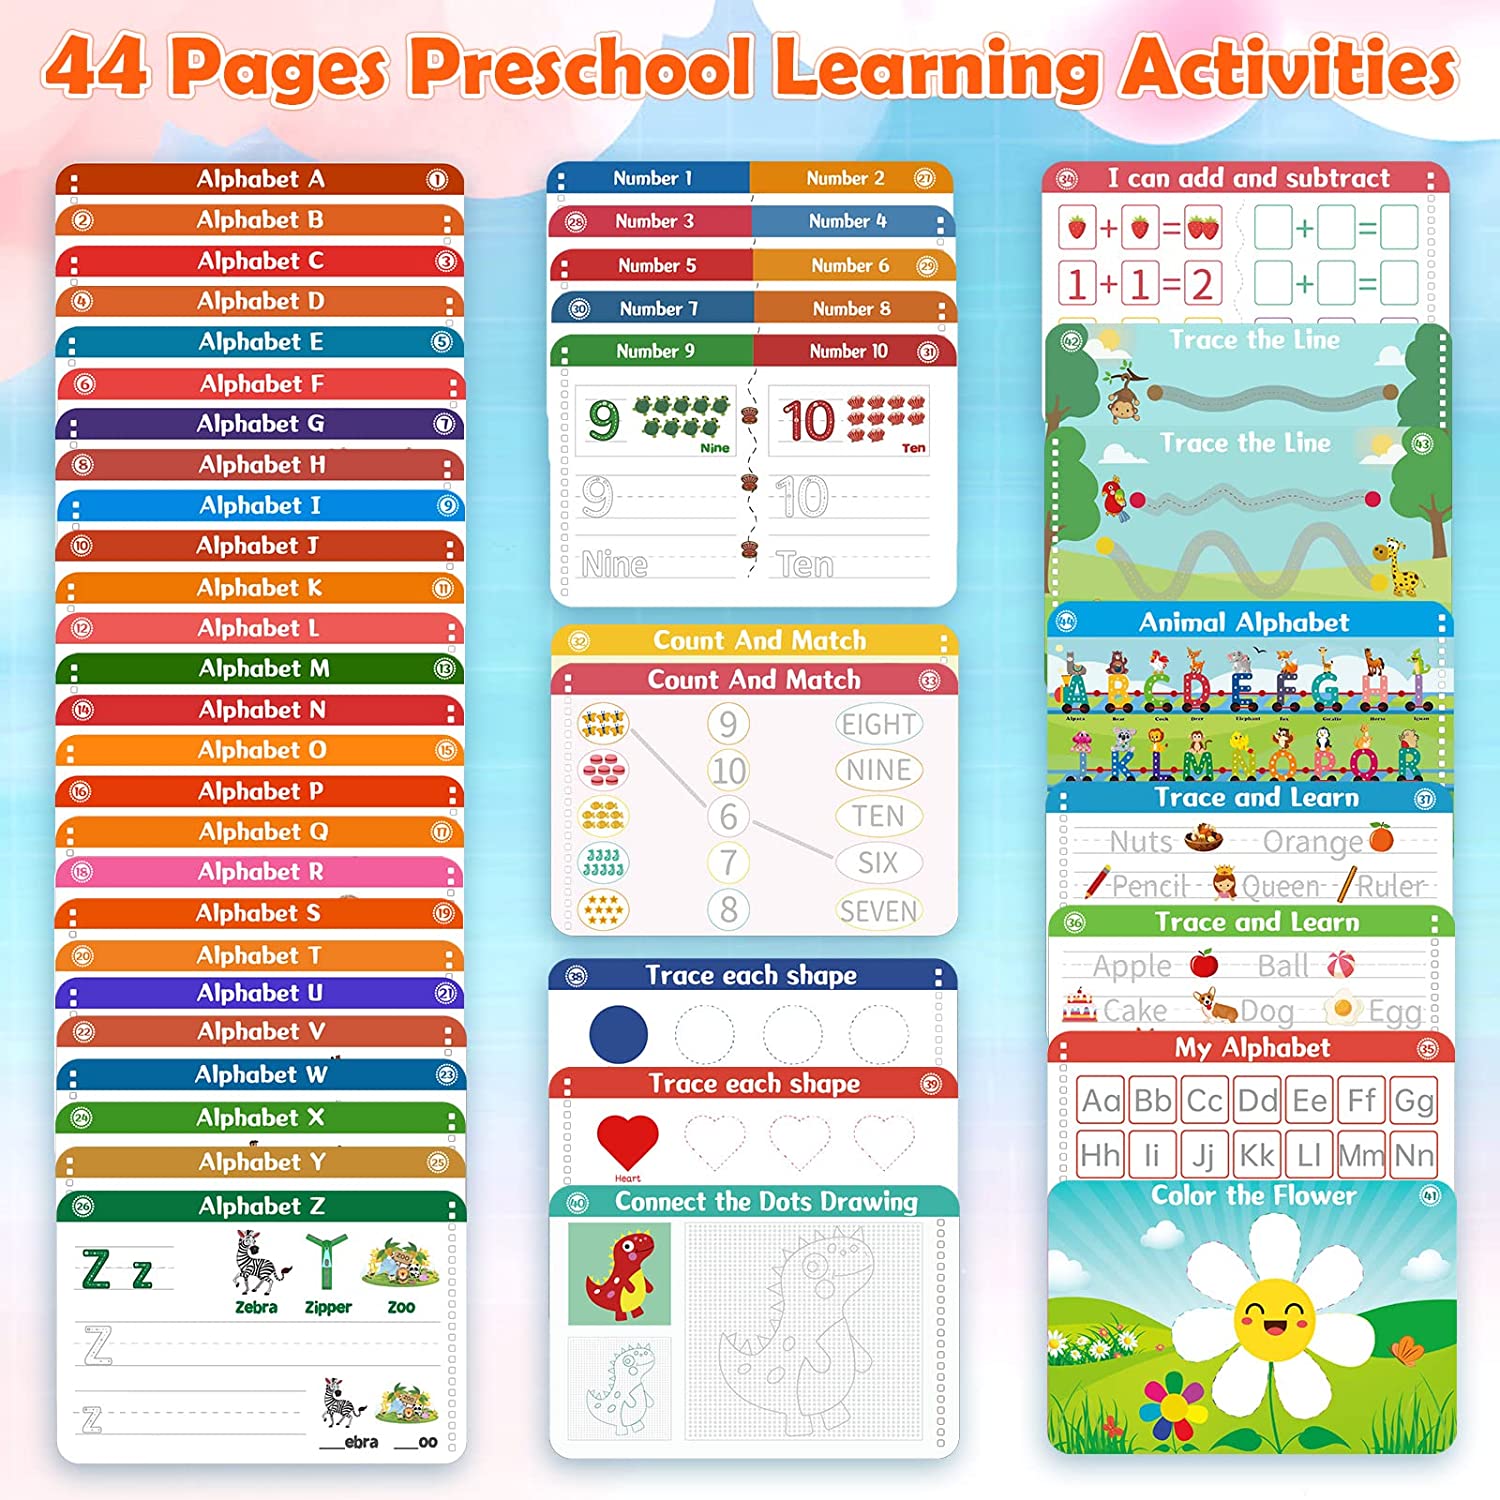 Preschool Learning Activities Tracing Books for Kids Age 3-5,44 Pages Toddlers Handwriting Practice Book,Number Letter Tracing Books Learn Shapes Workbook Autism Educational Toy